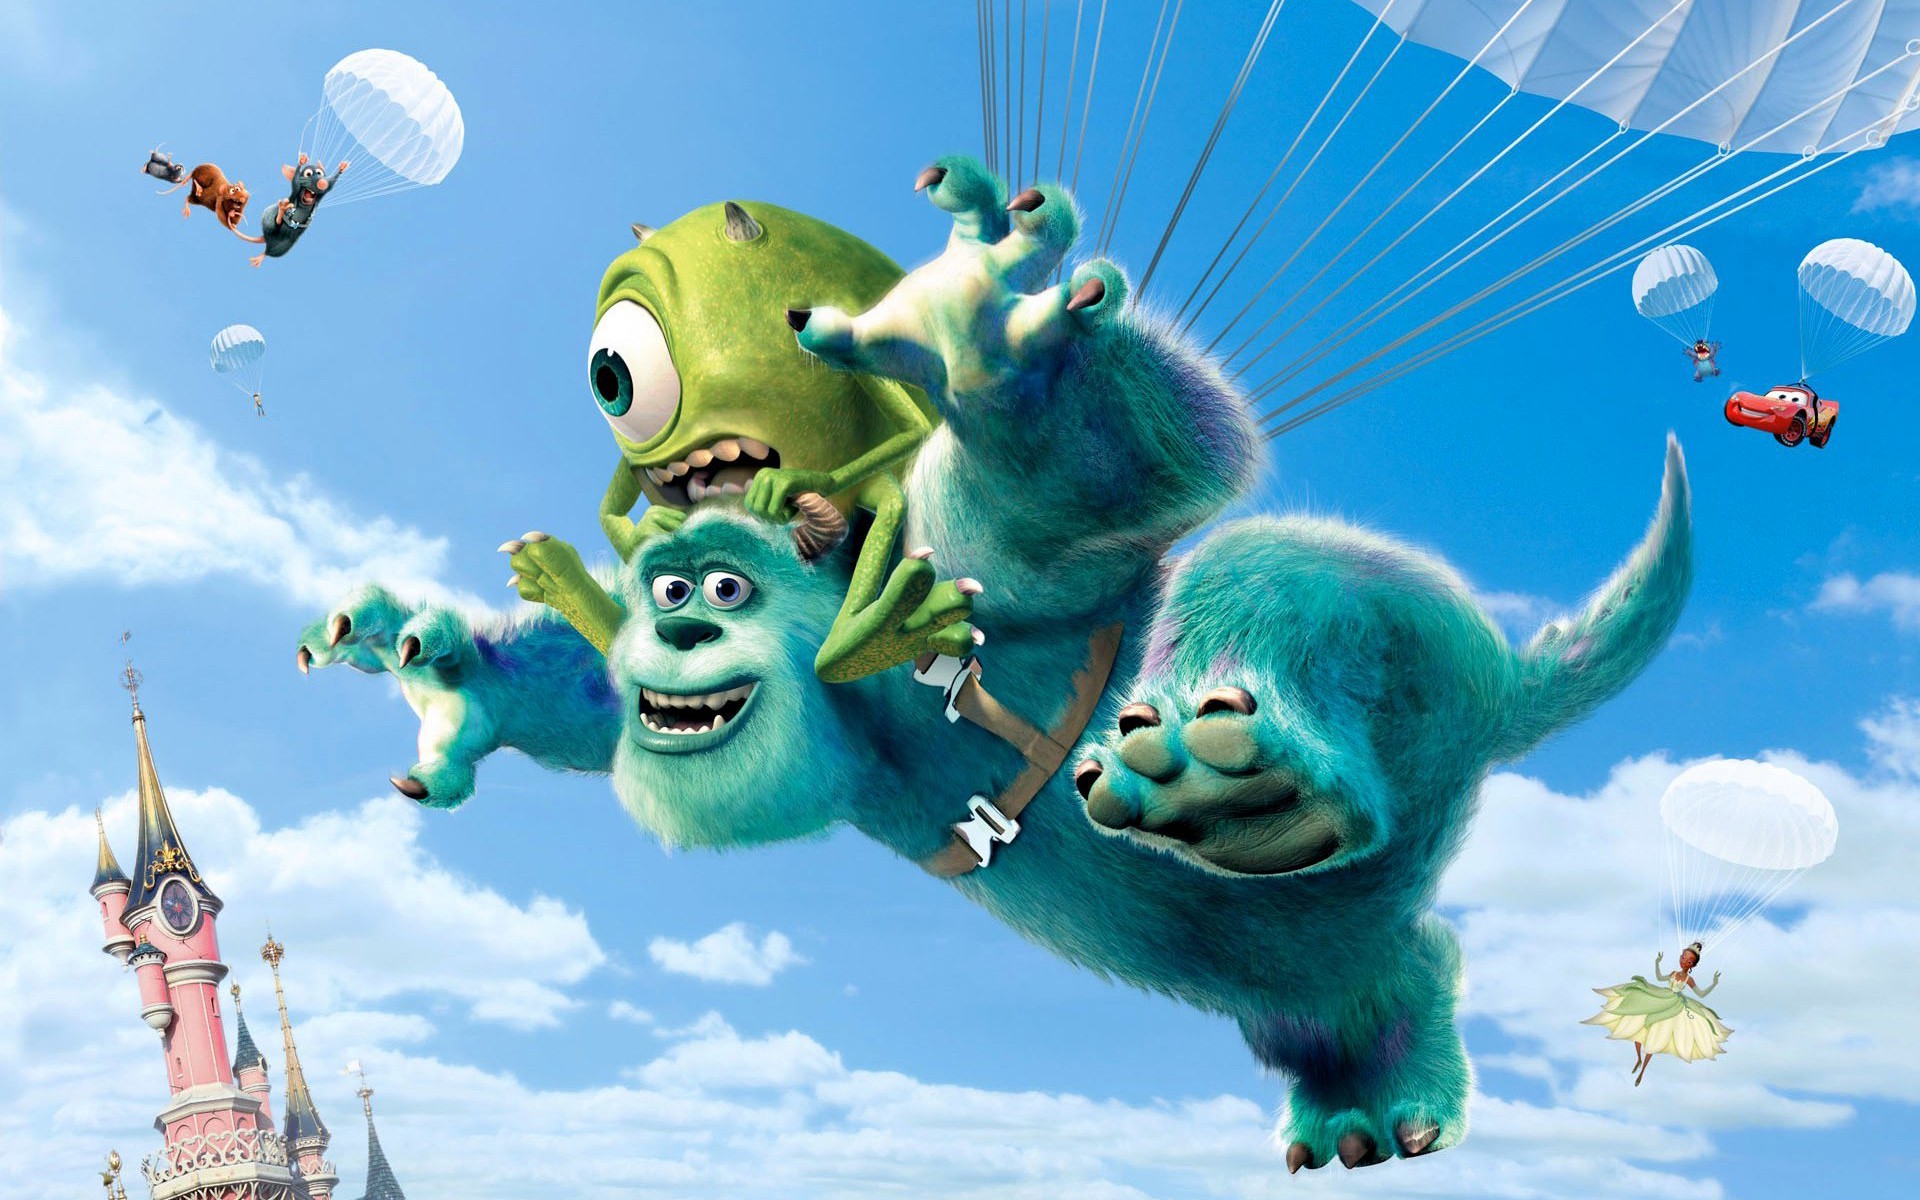 Monster Inc Wallpaper Hd 98 images in Collection Page 2